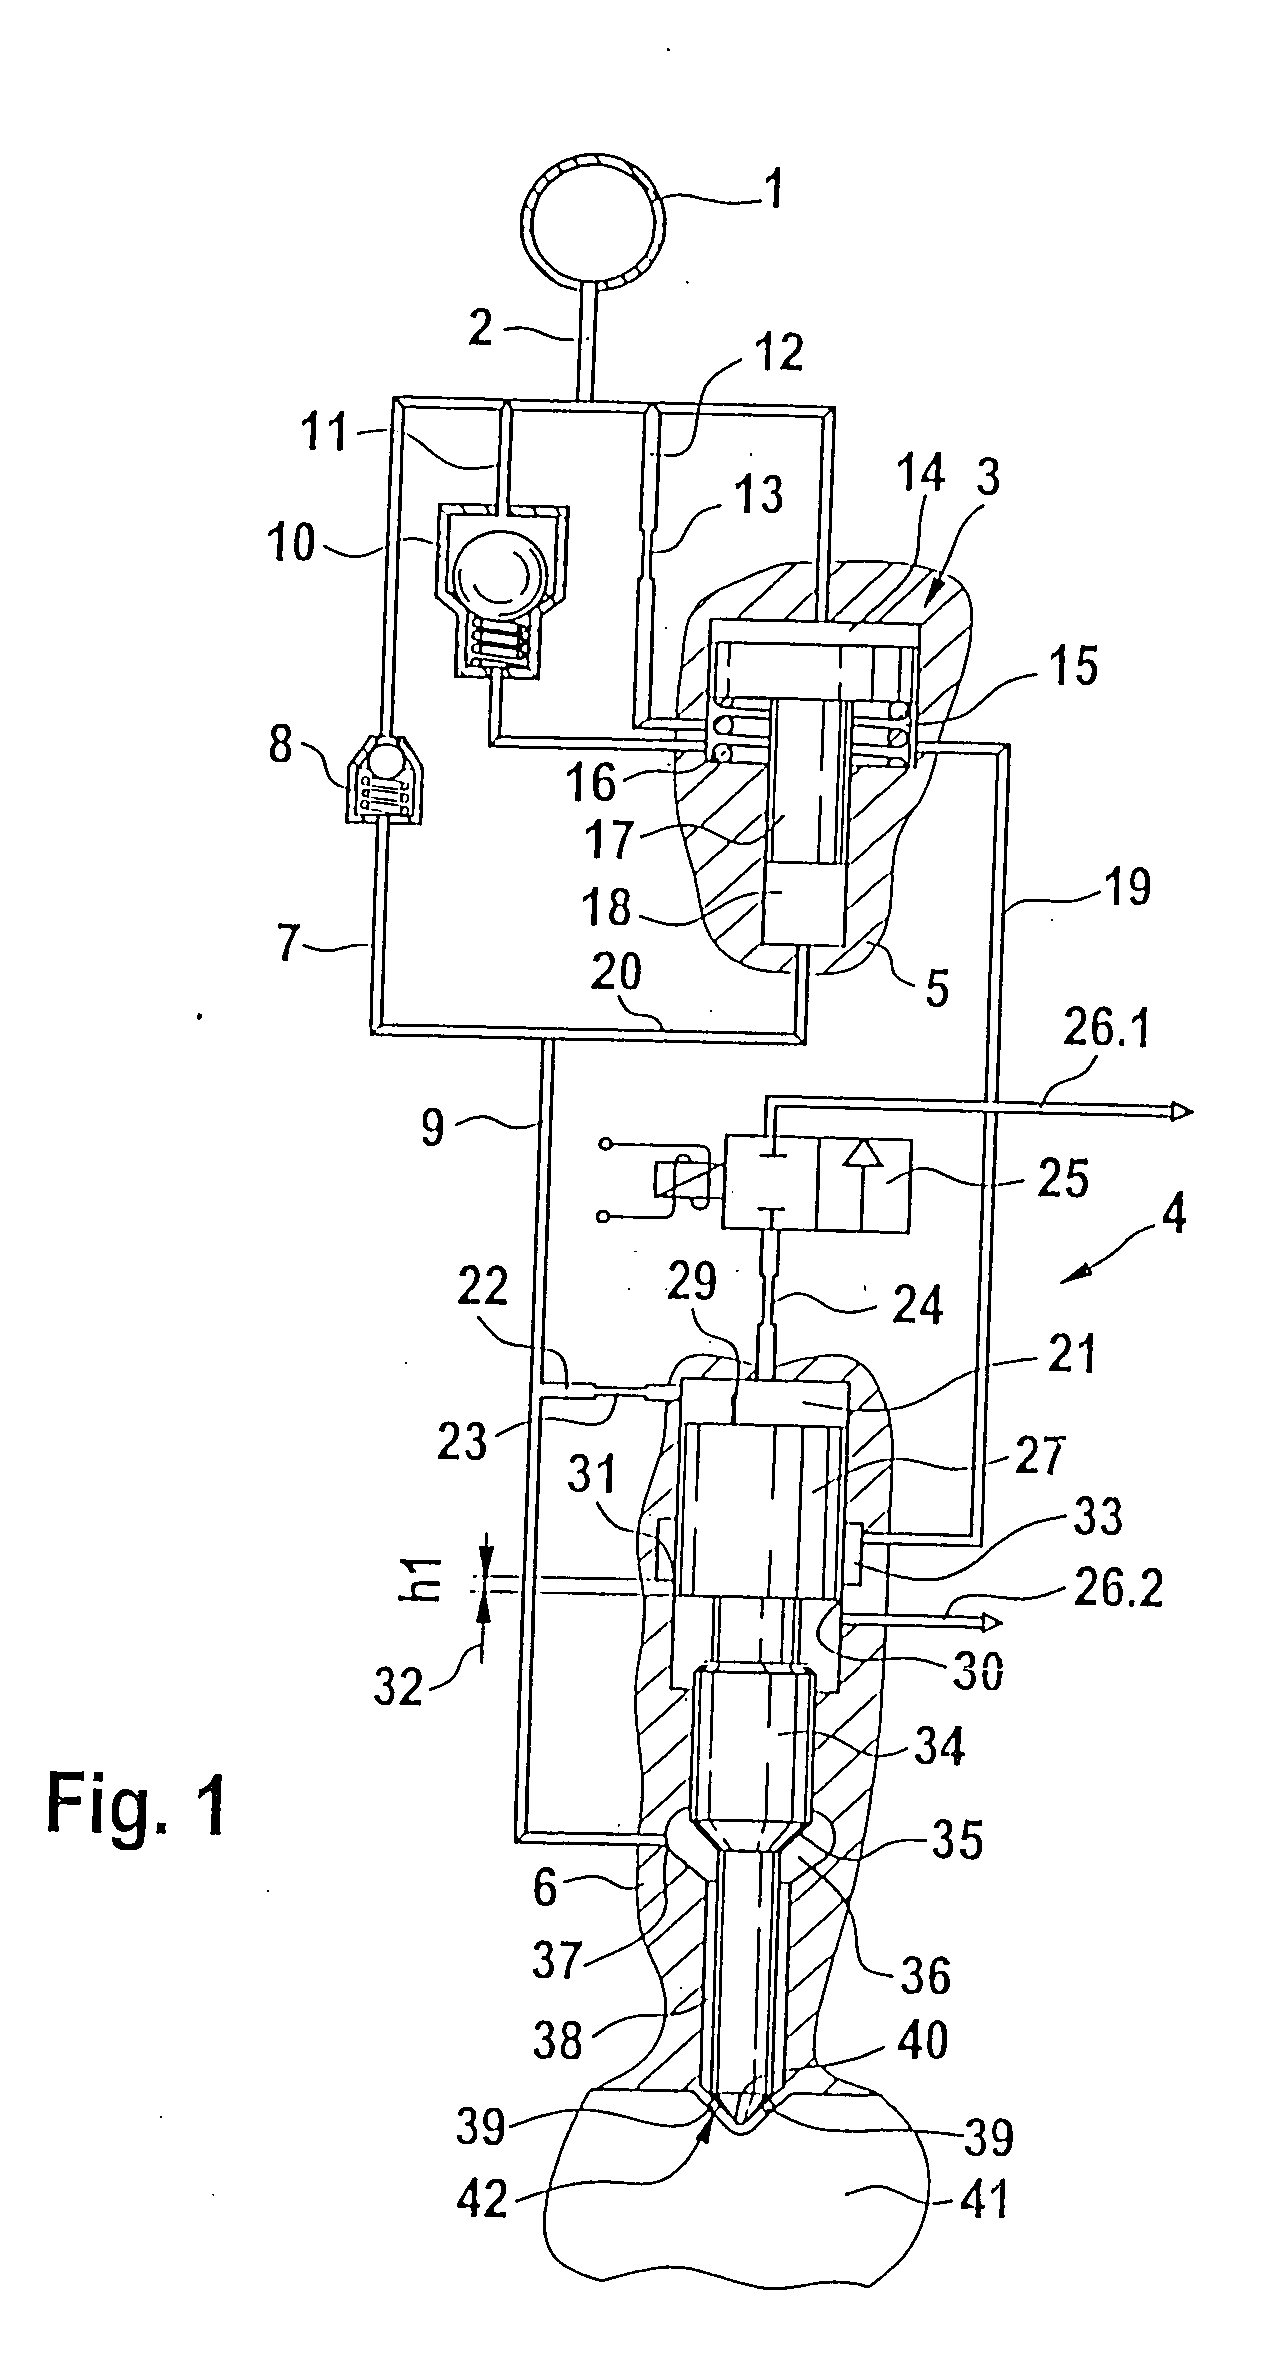 Control of a pressure exchanger by displacement of an injection valve member